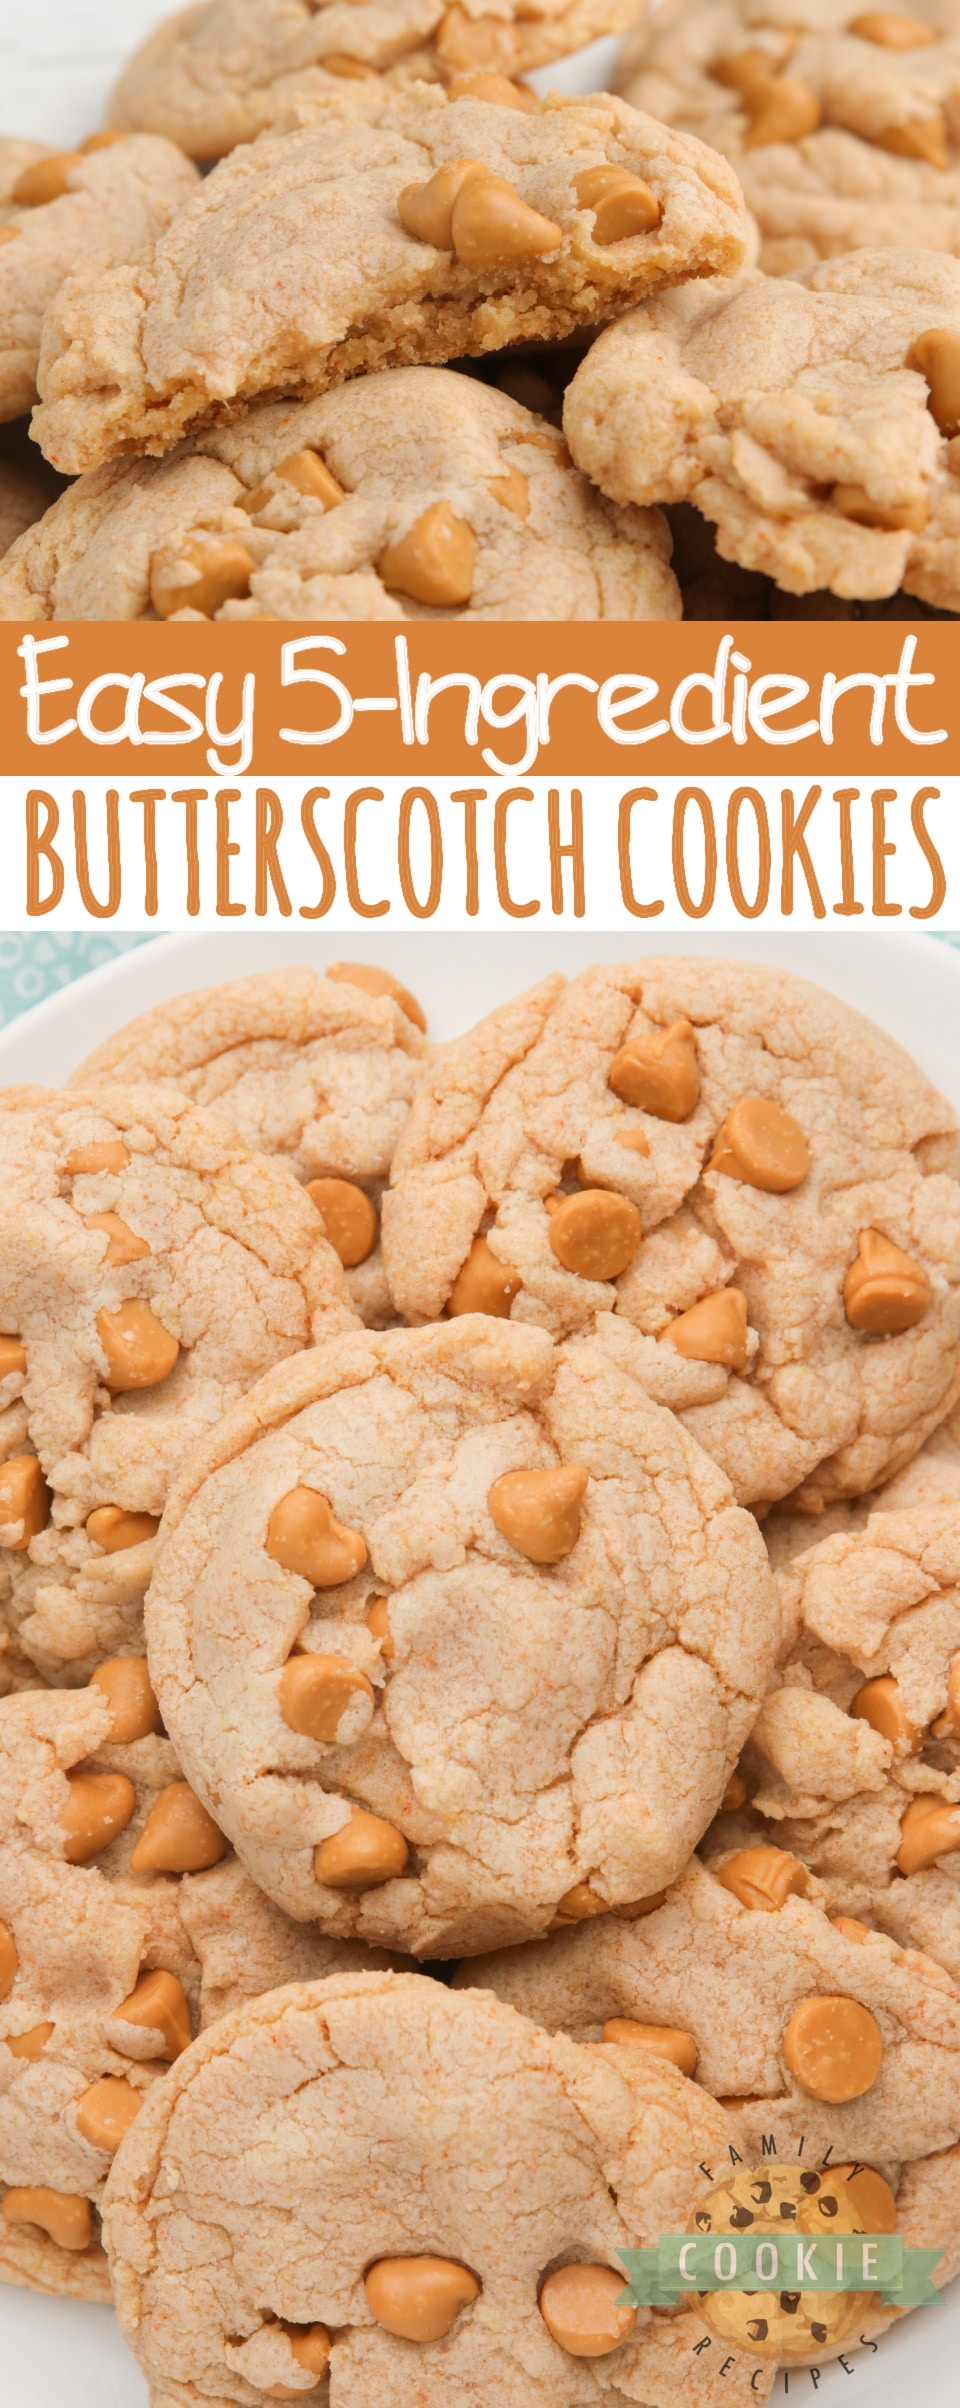 Easy Butterscotch Cookies made with a sugar cookie mix and butterscotch pudding. Only 5 ingredients needed for these delicious cookies that are soft, chewy and packed with tons of butterscotch flavor!  via @buttergirls